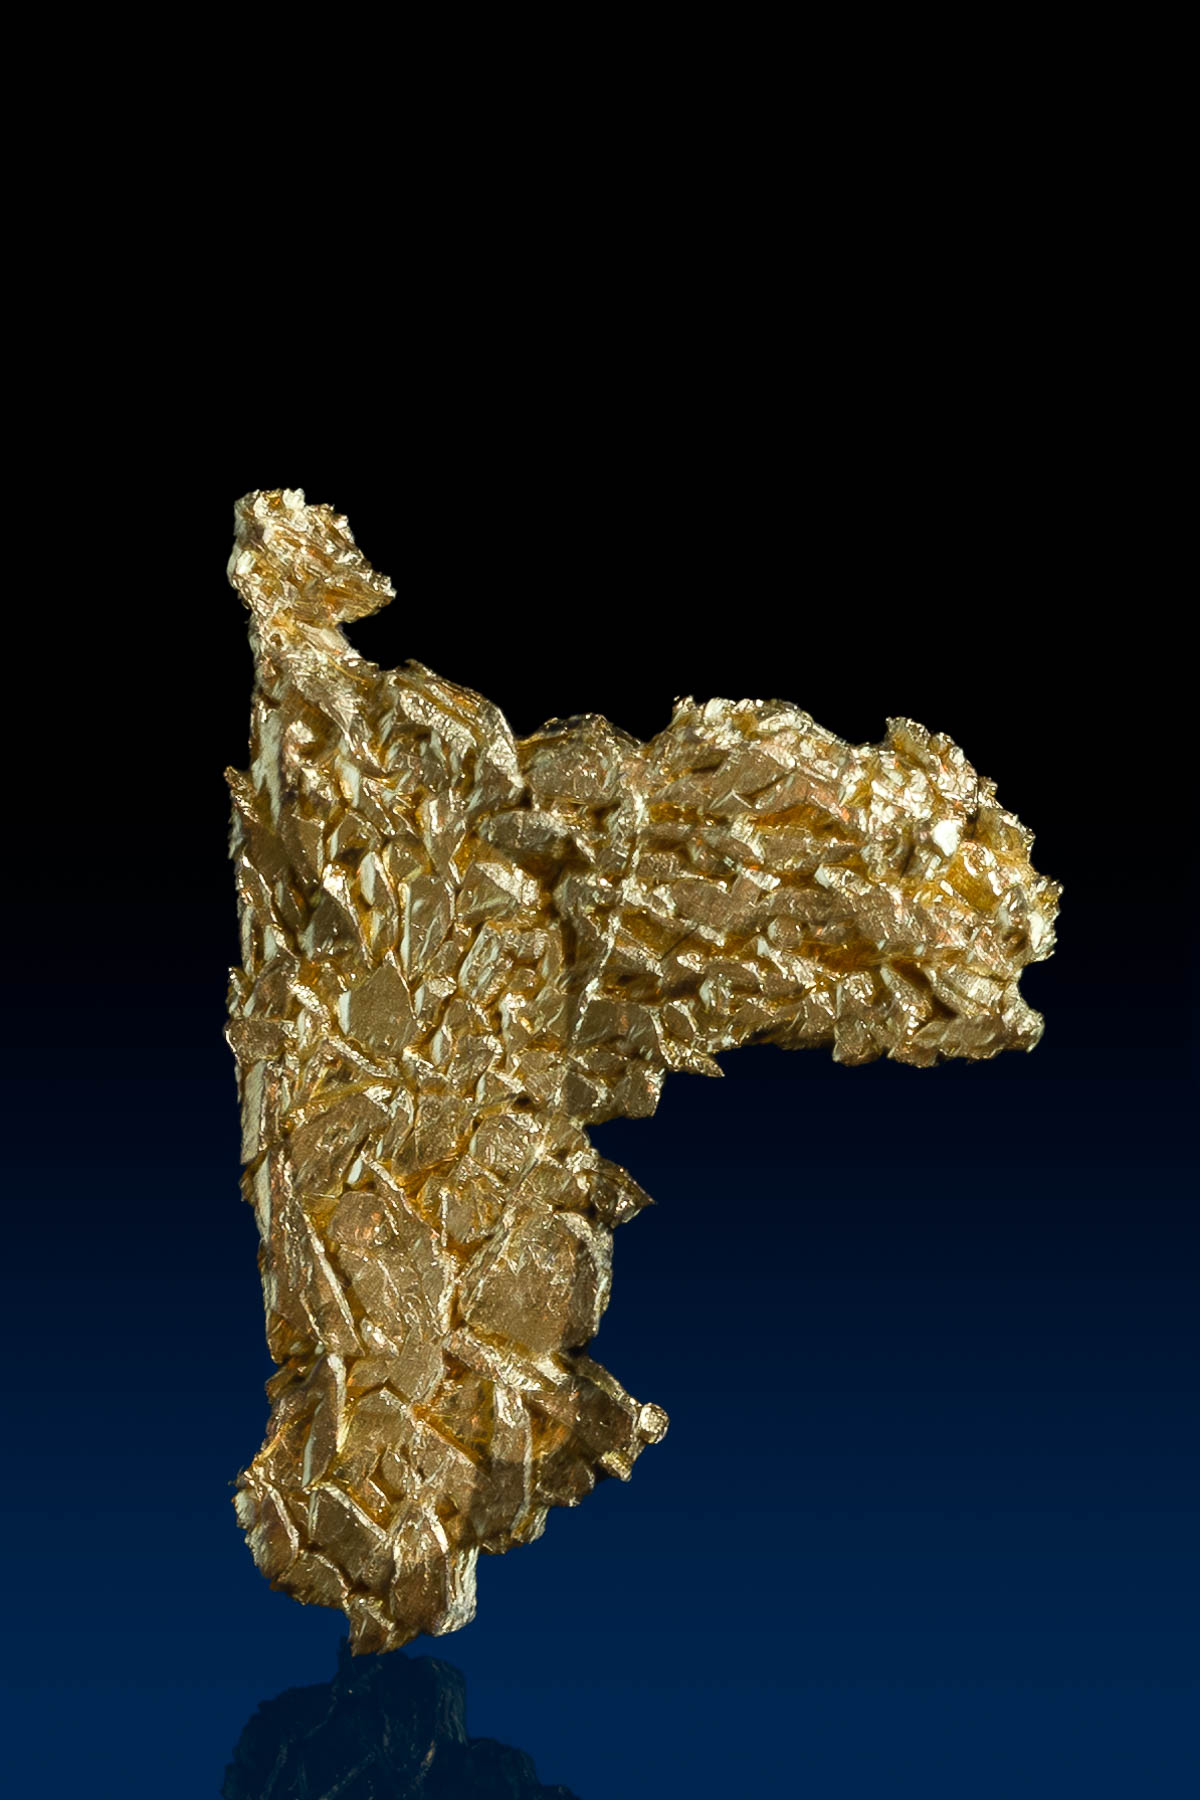 Brilliant Layered Gold Crystal Specimen - French Gulch, CO